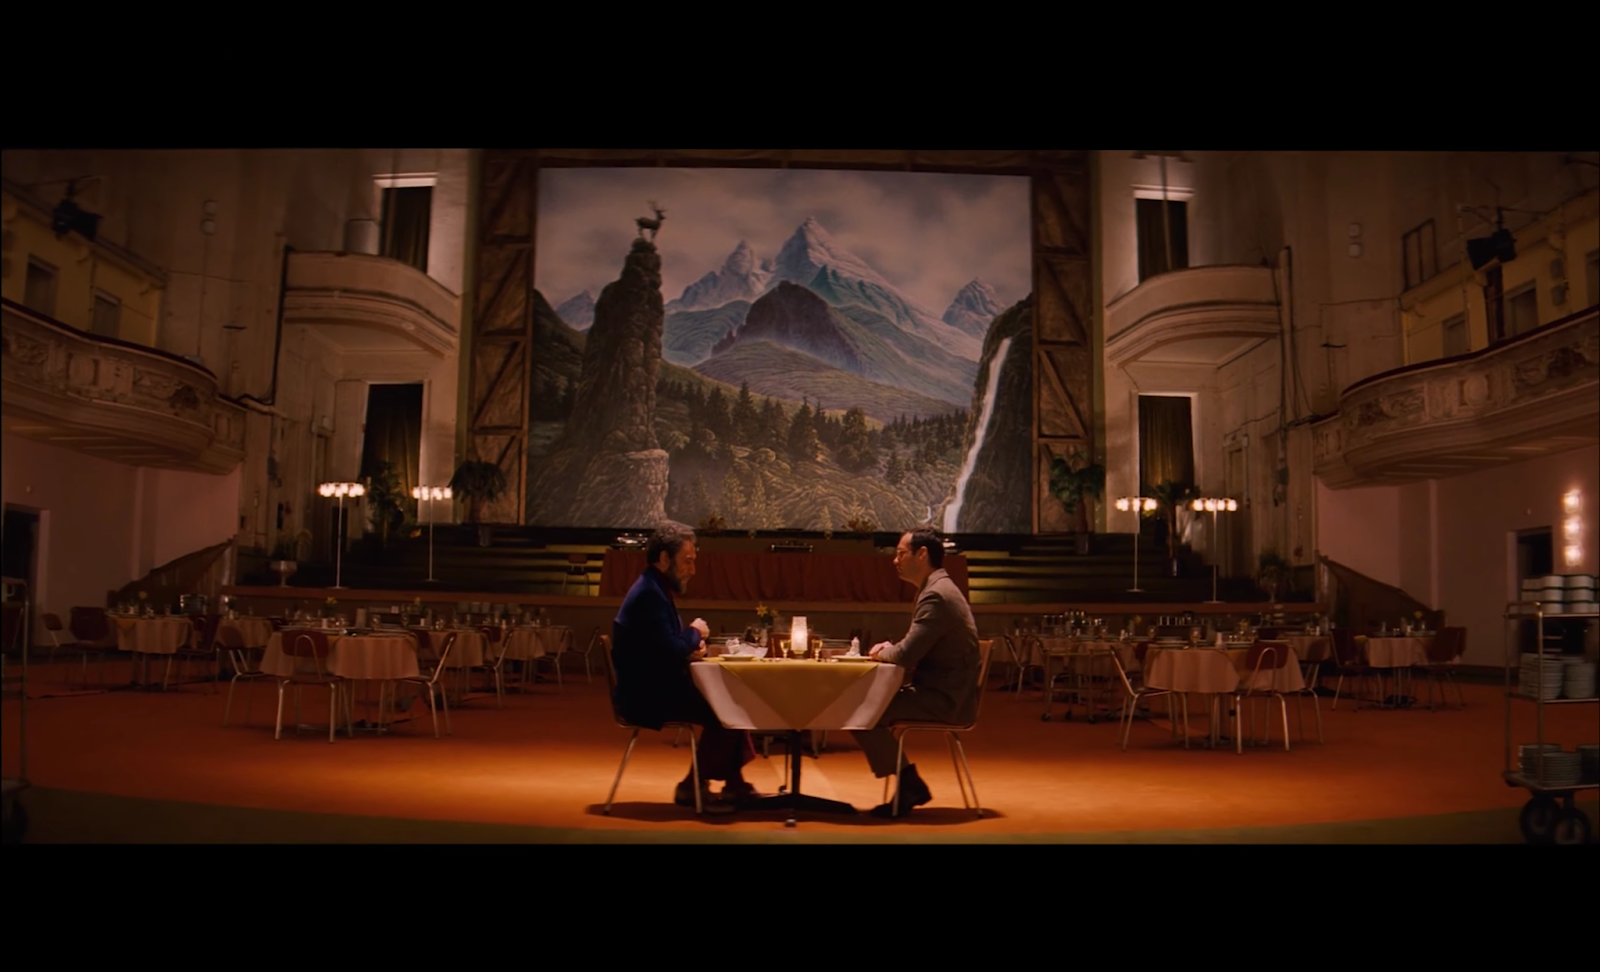 Wes Anderson aspect ratio 2